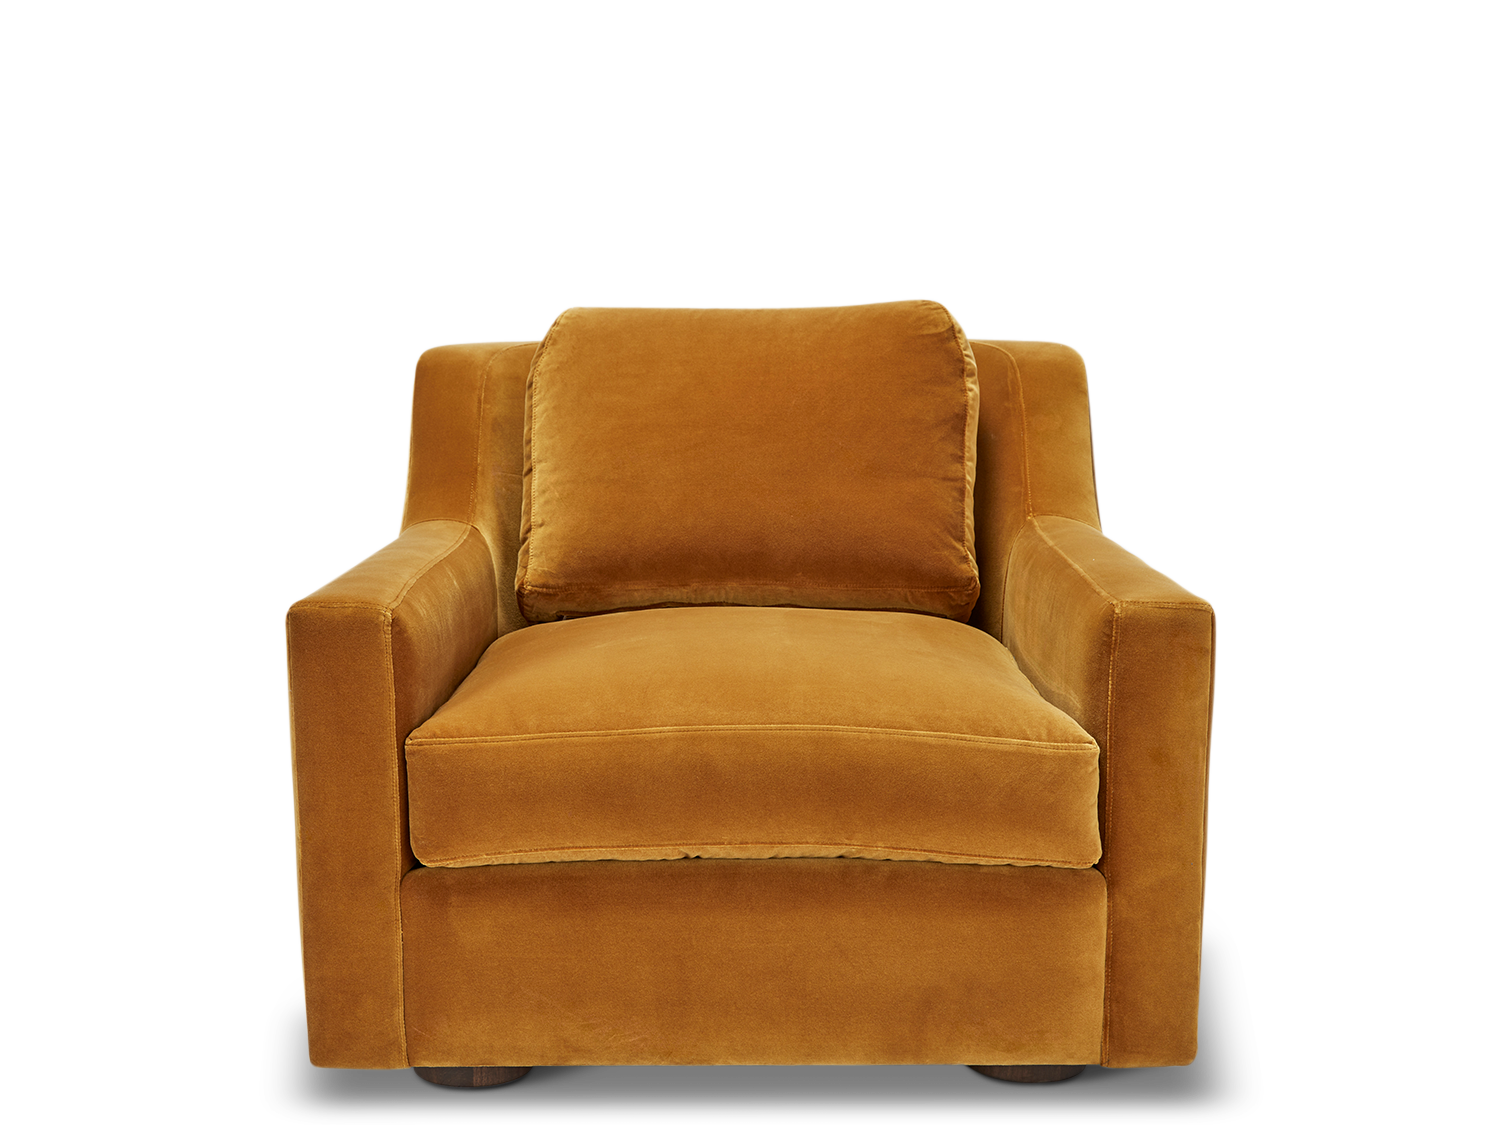 Brian Paquette x LF - Justin Lounge Chair